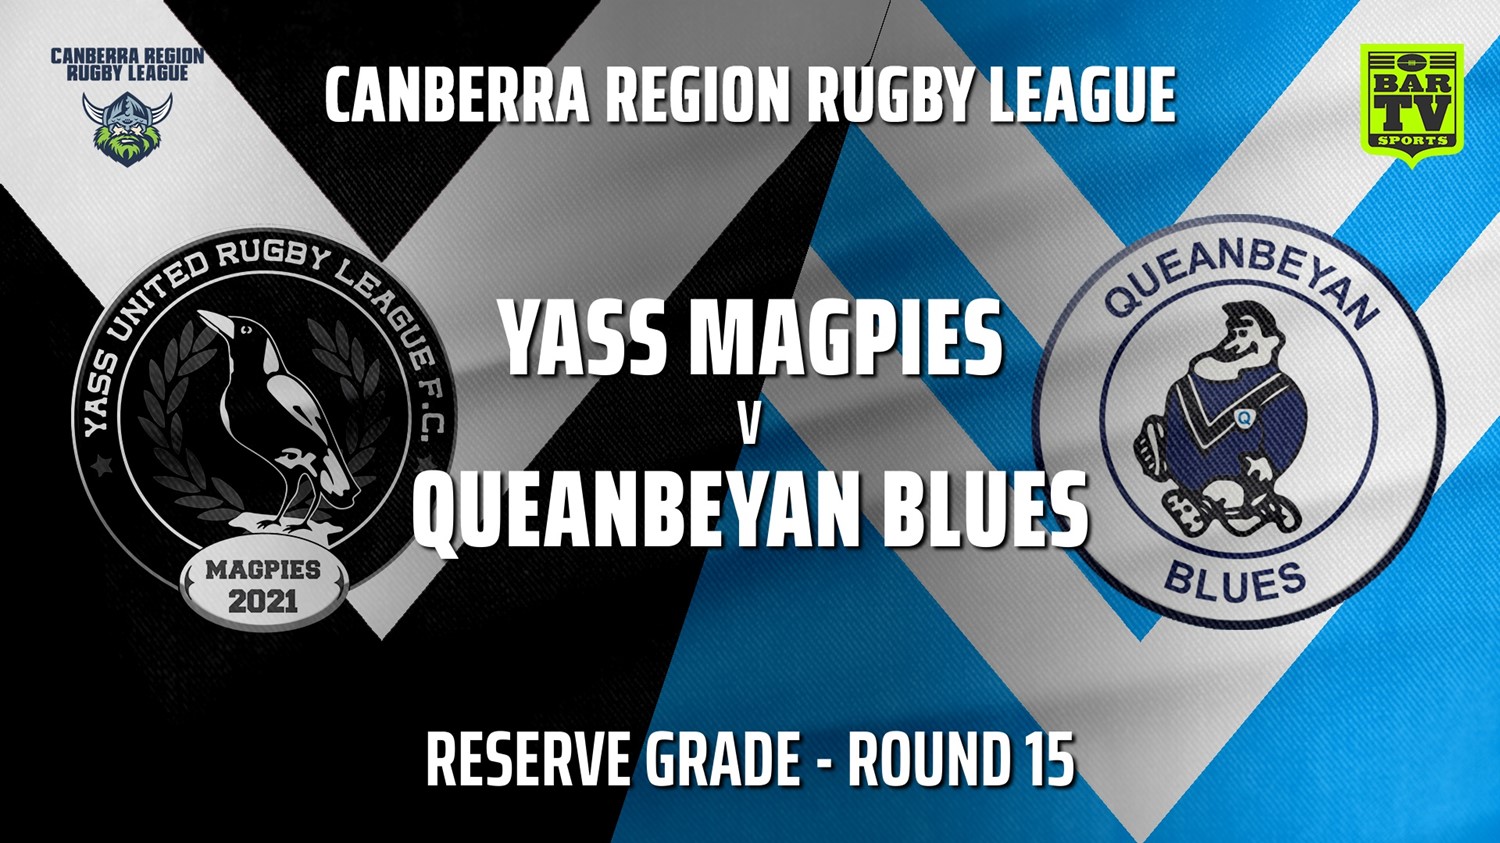 210807-Canberra Round 15 - Reserve Grade - Yass Magpies v Queanbeyan Blues Slate Image